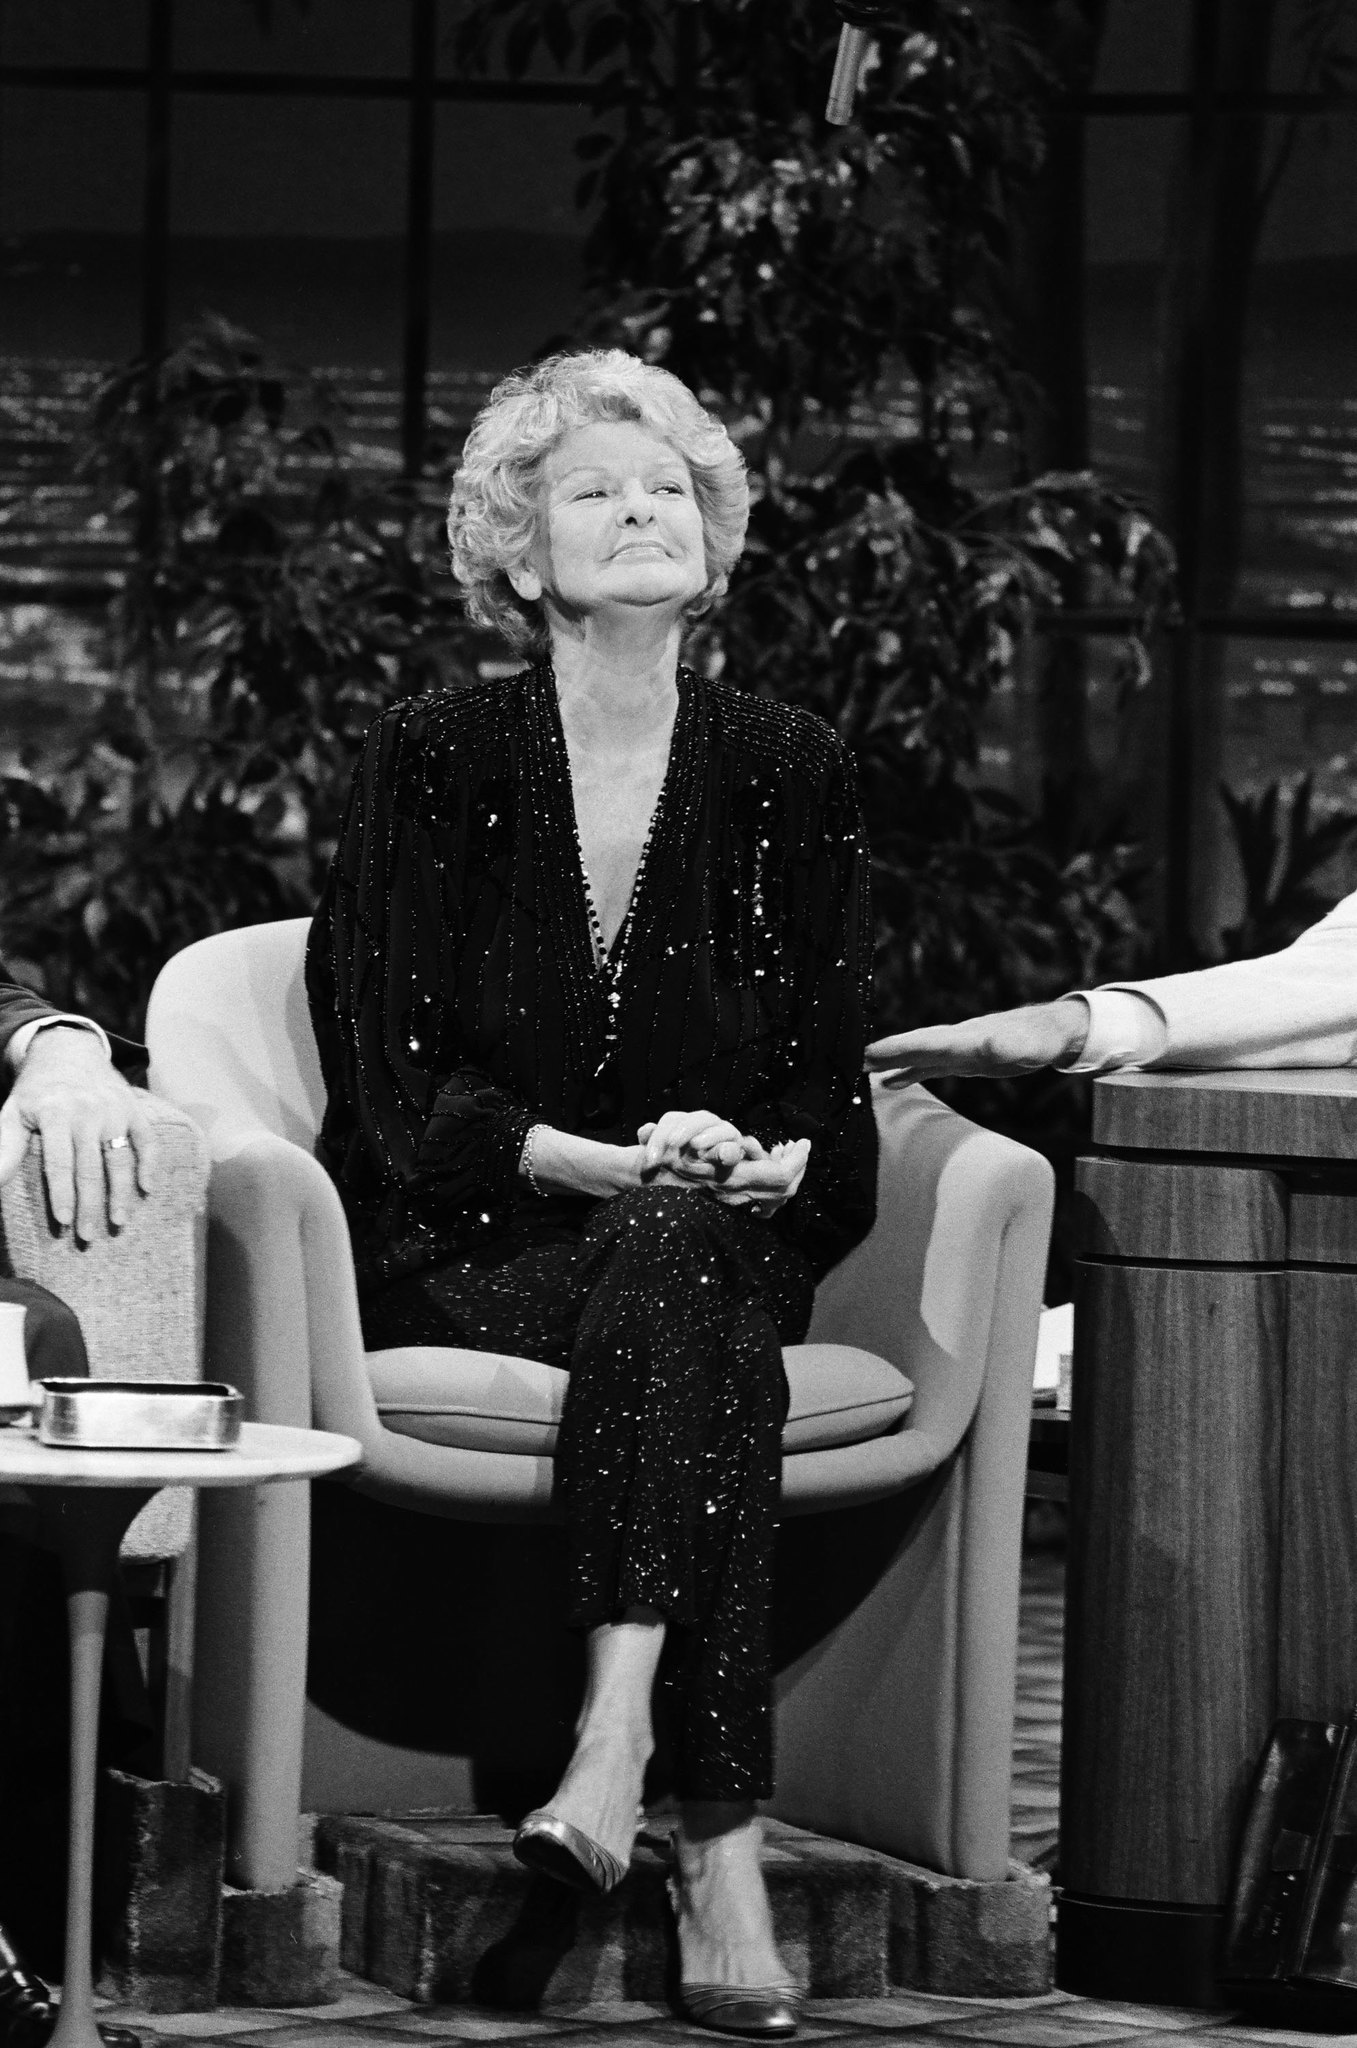 Johnny Carson and Elaine Stritch at event of The Tonight Show Starring Johnny Carson (1962)